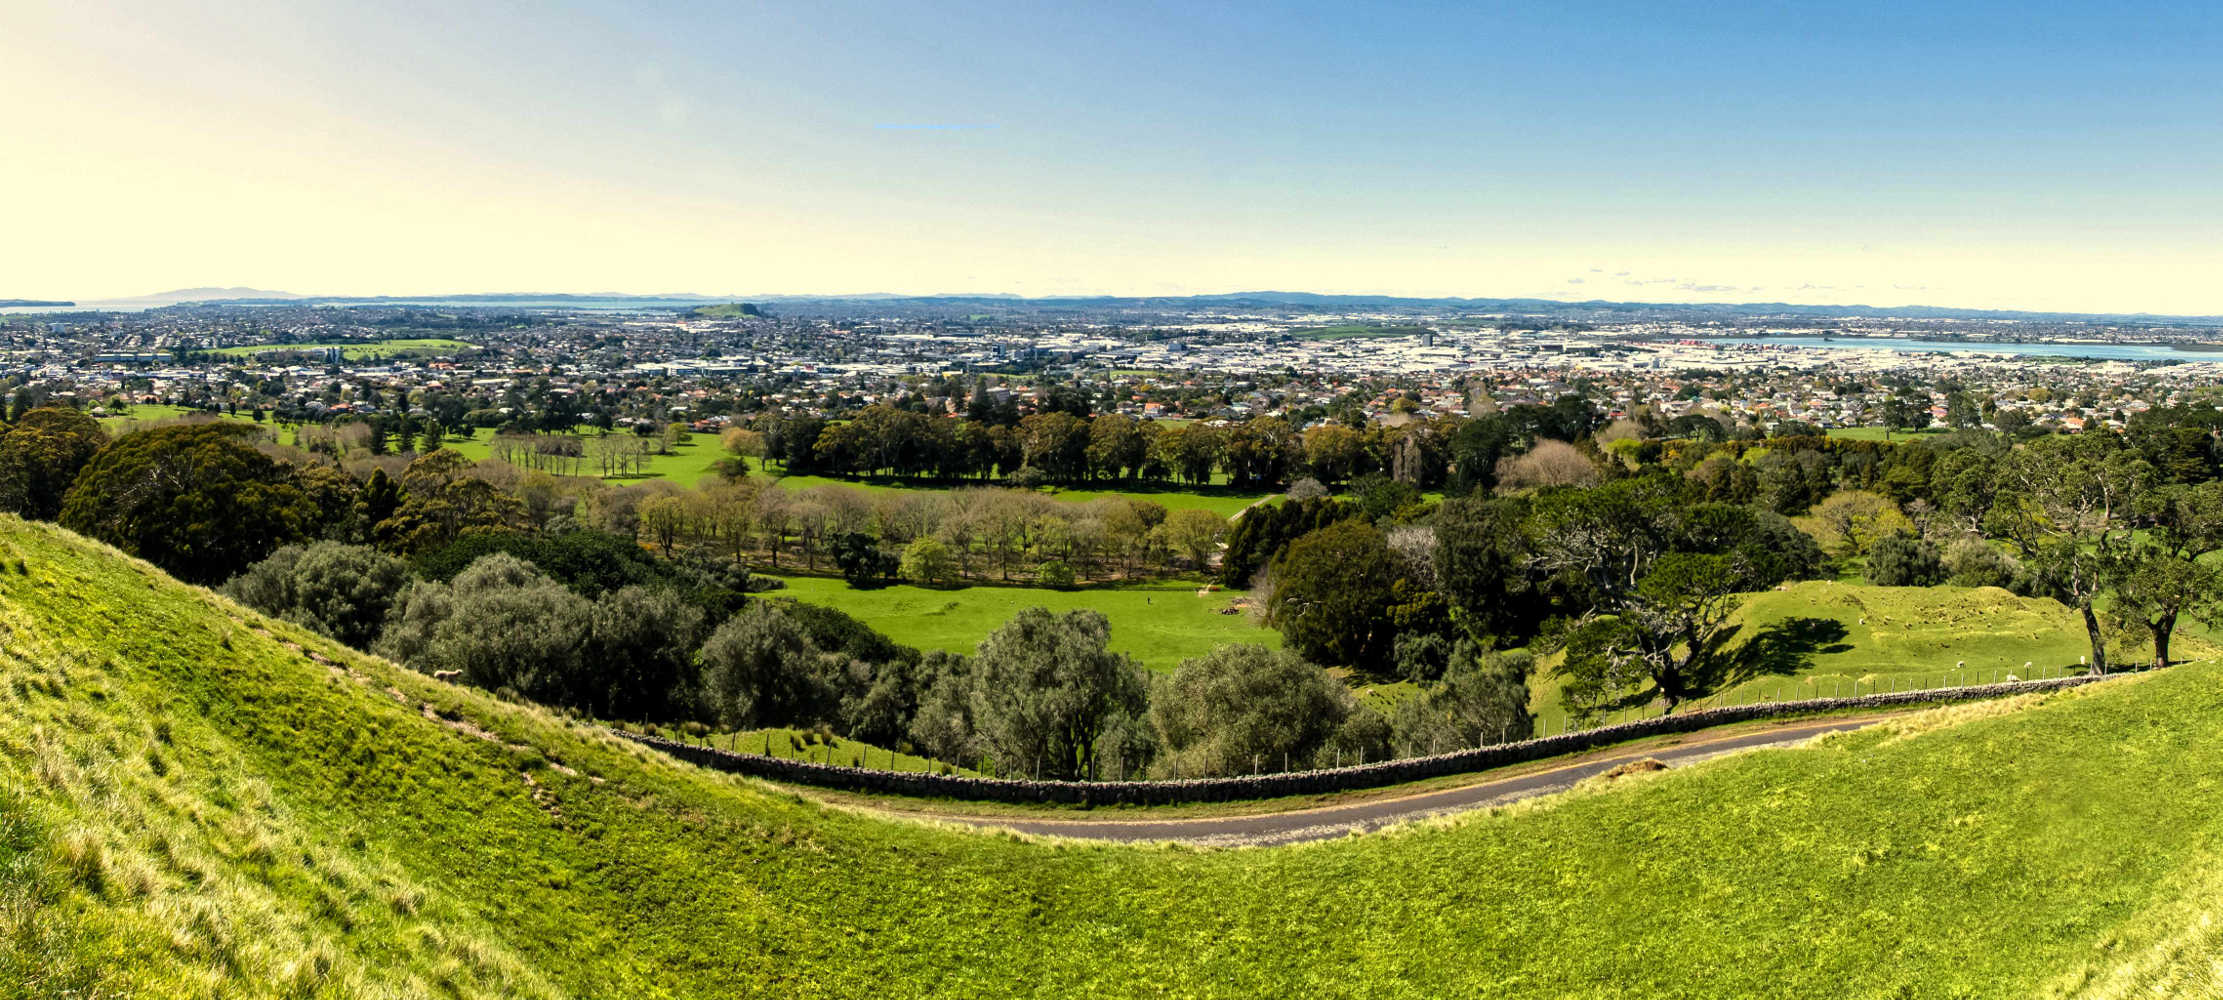 Cornwall park, panorama view from the One Tree Hill, Auckland New Zealand